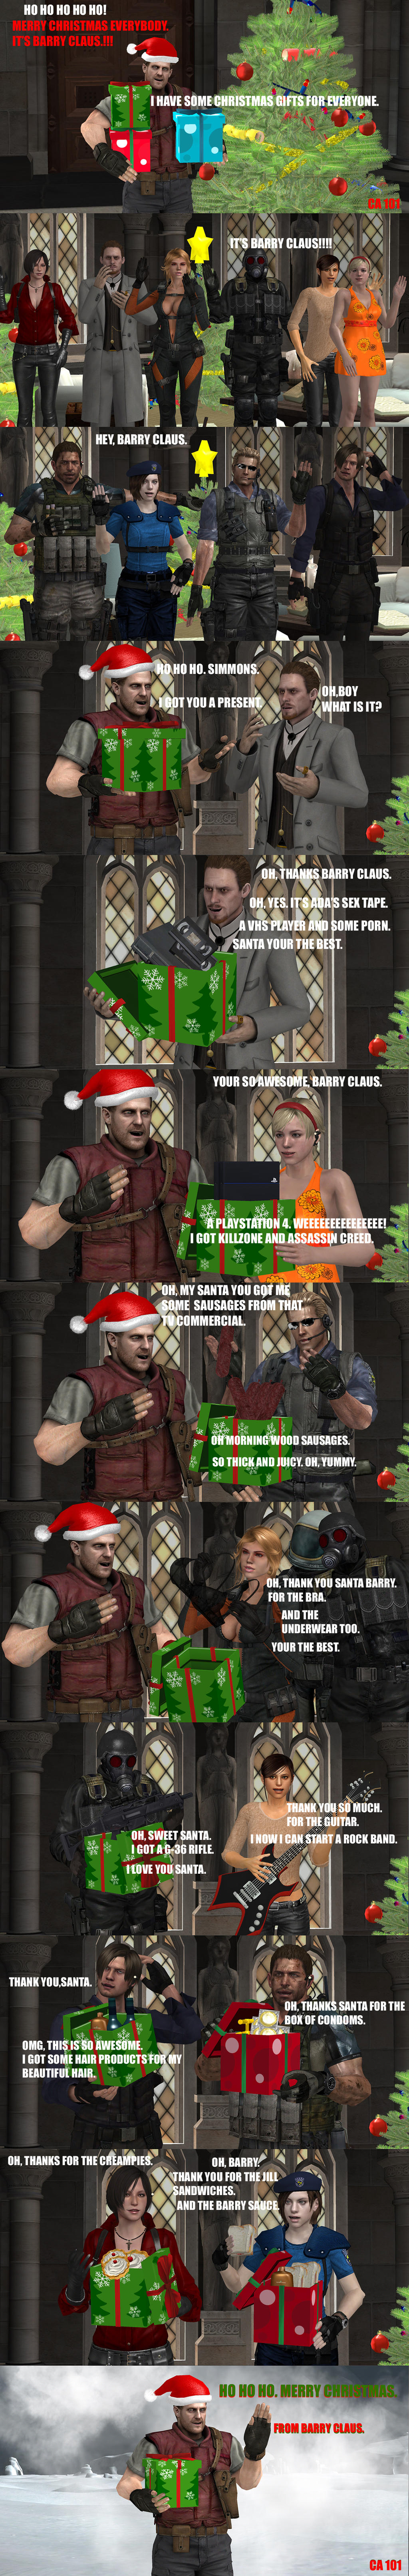 it_s_barry_claus_a_resident_evil_parody__by_chrisastro101-d8anf8s.jpg